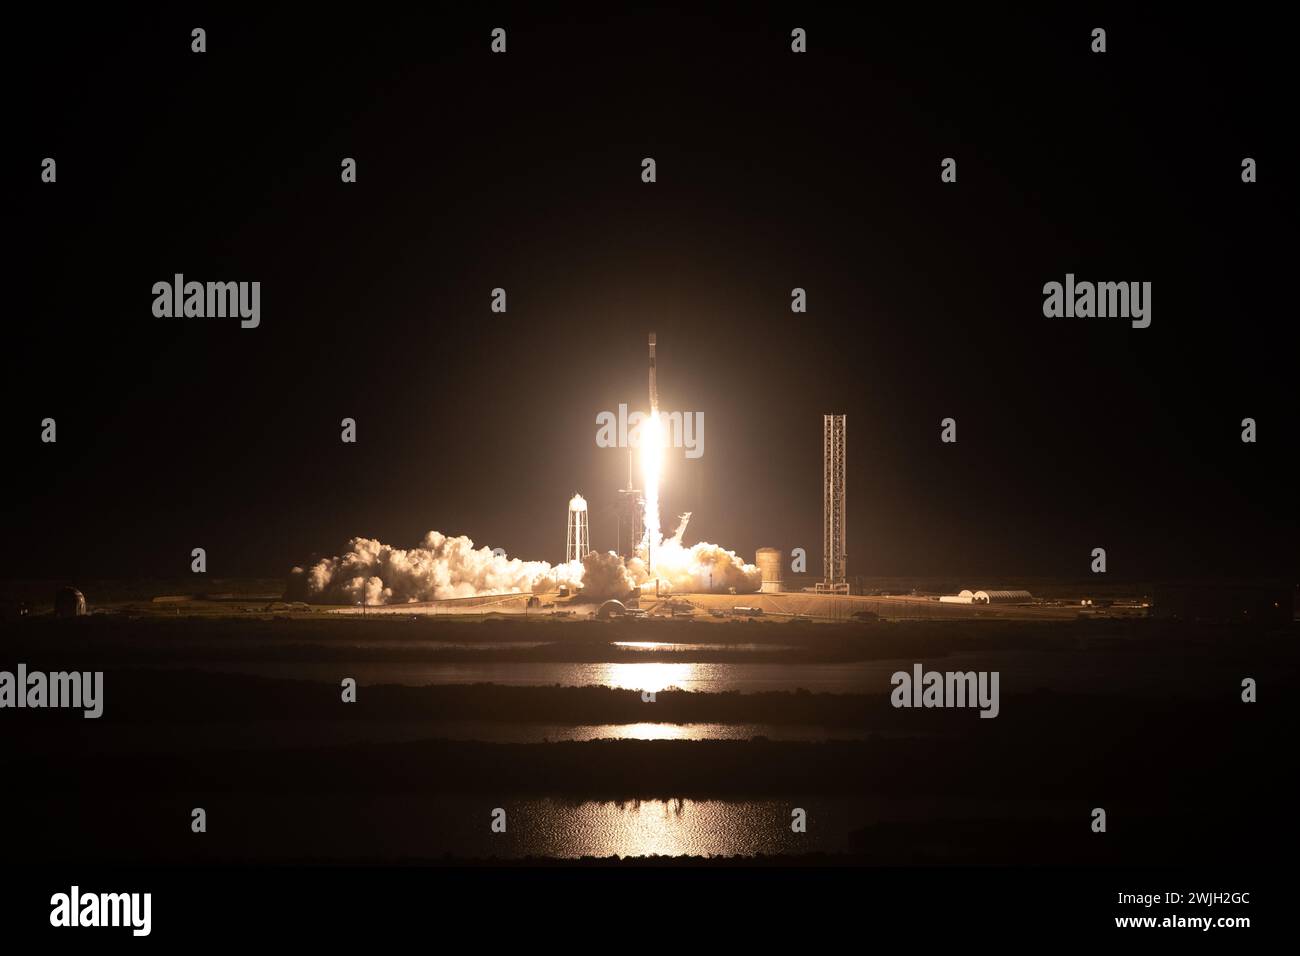 A SpaceX Falcon 9 rocket carrying Intuitive Machines’ Nova-C lunar lander lifts off from Launch Pad 39A at NASA’s Kennedy Space Center in Florida at 1 Stock Photo